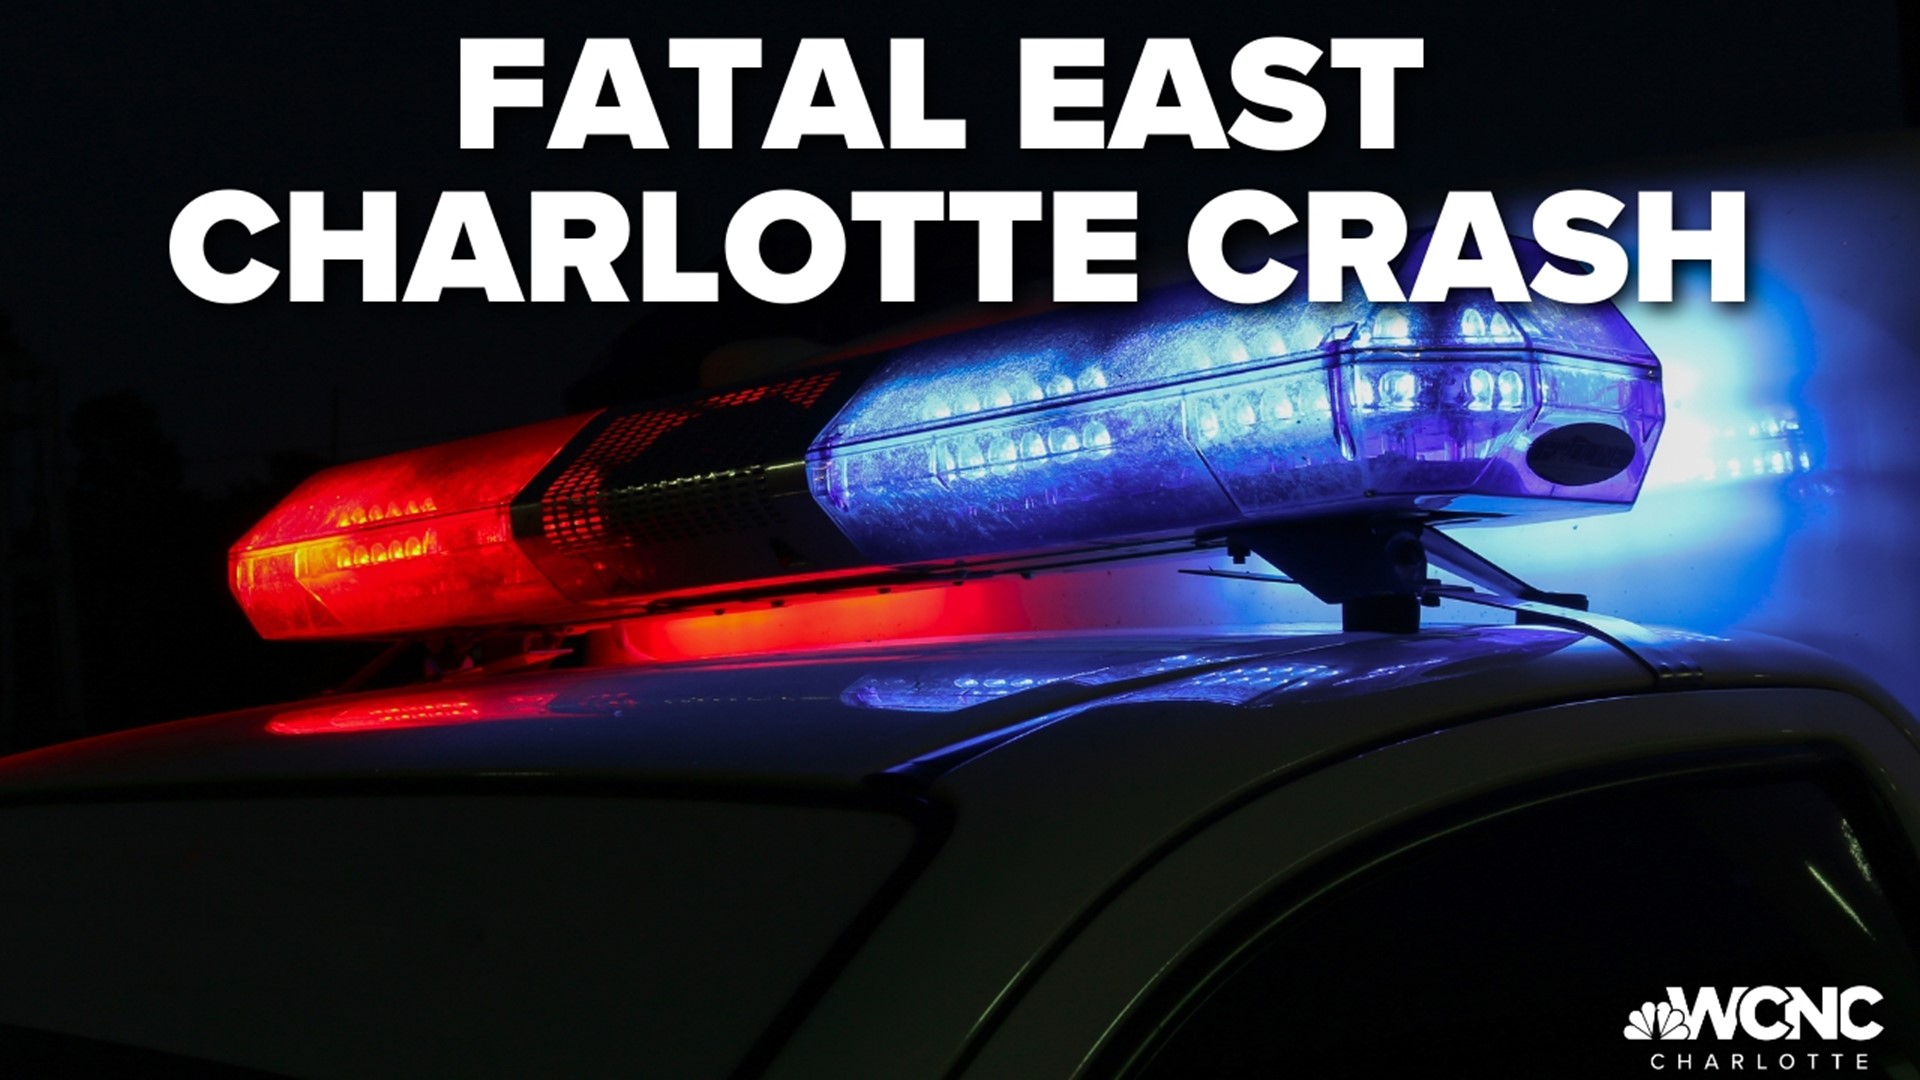 One person was pronounced dead after an auto-pedestrian crash on I-485 in east Charlotte.